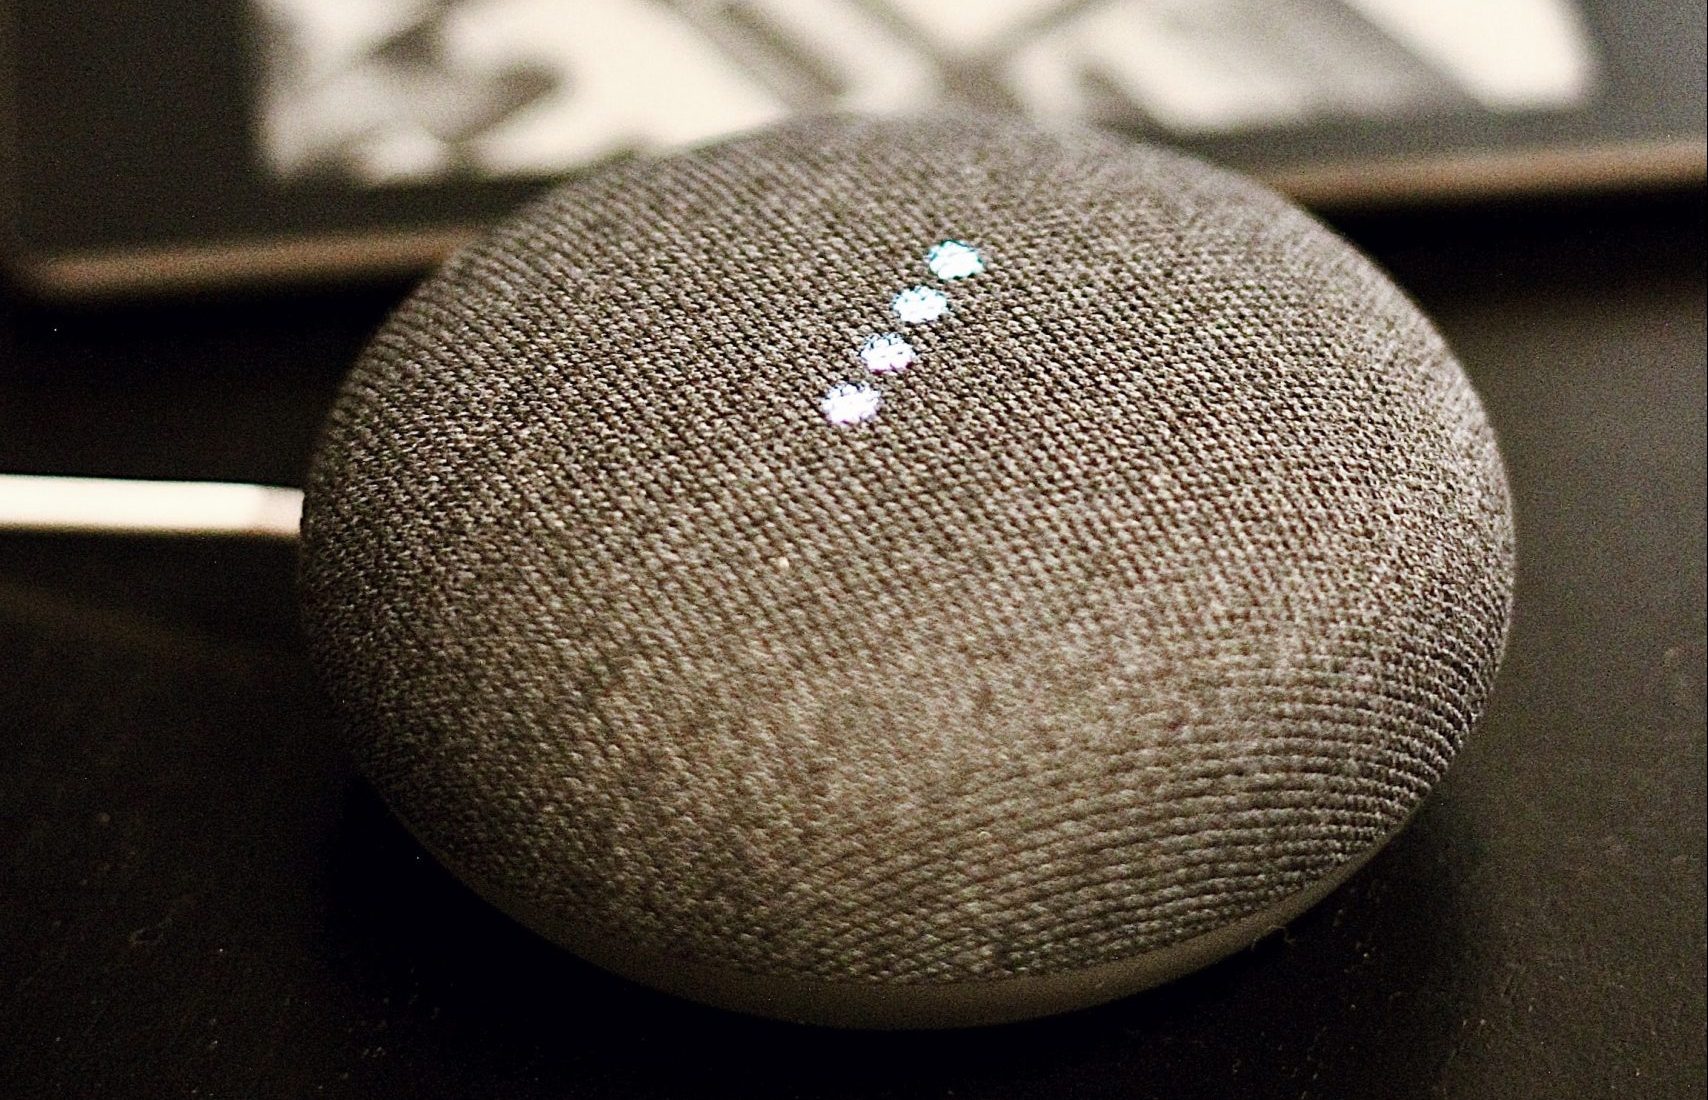 Developing for Smart Voice Assistants Such As Google Home